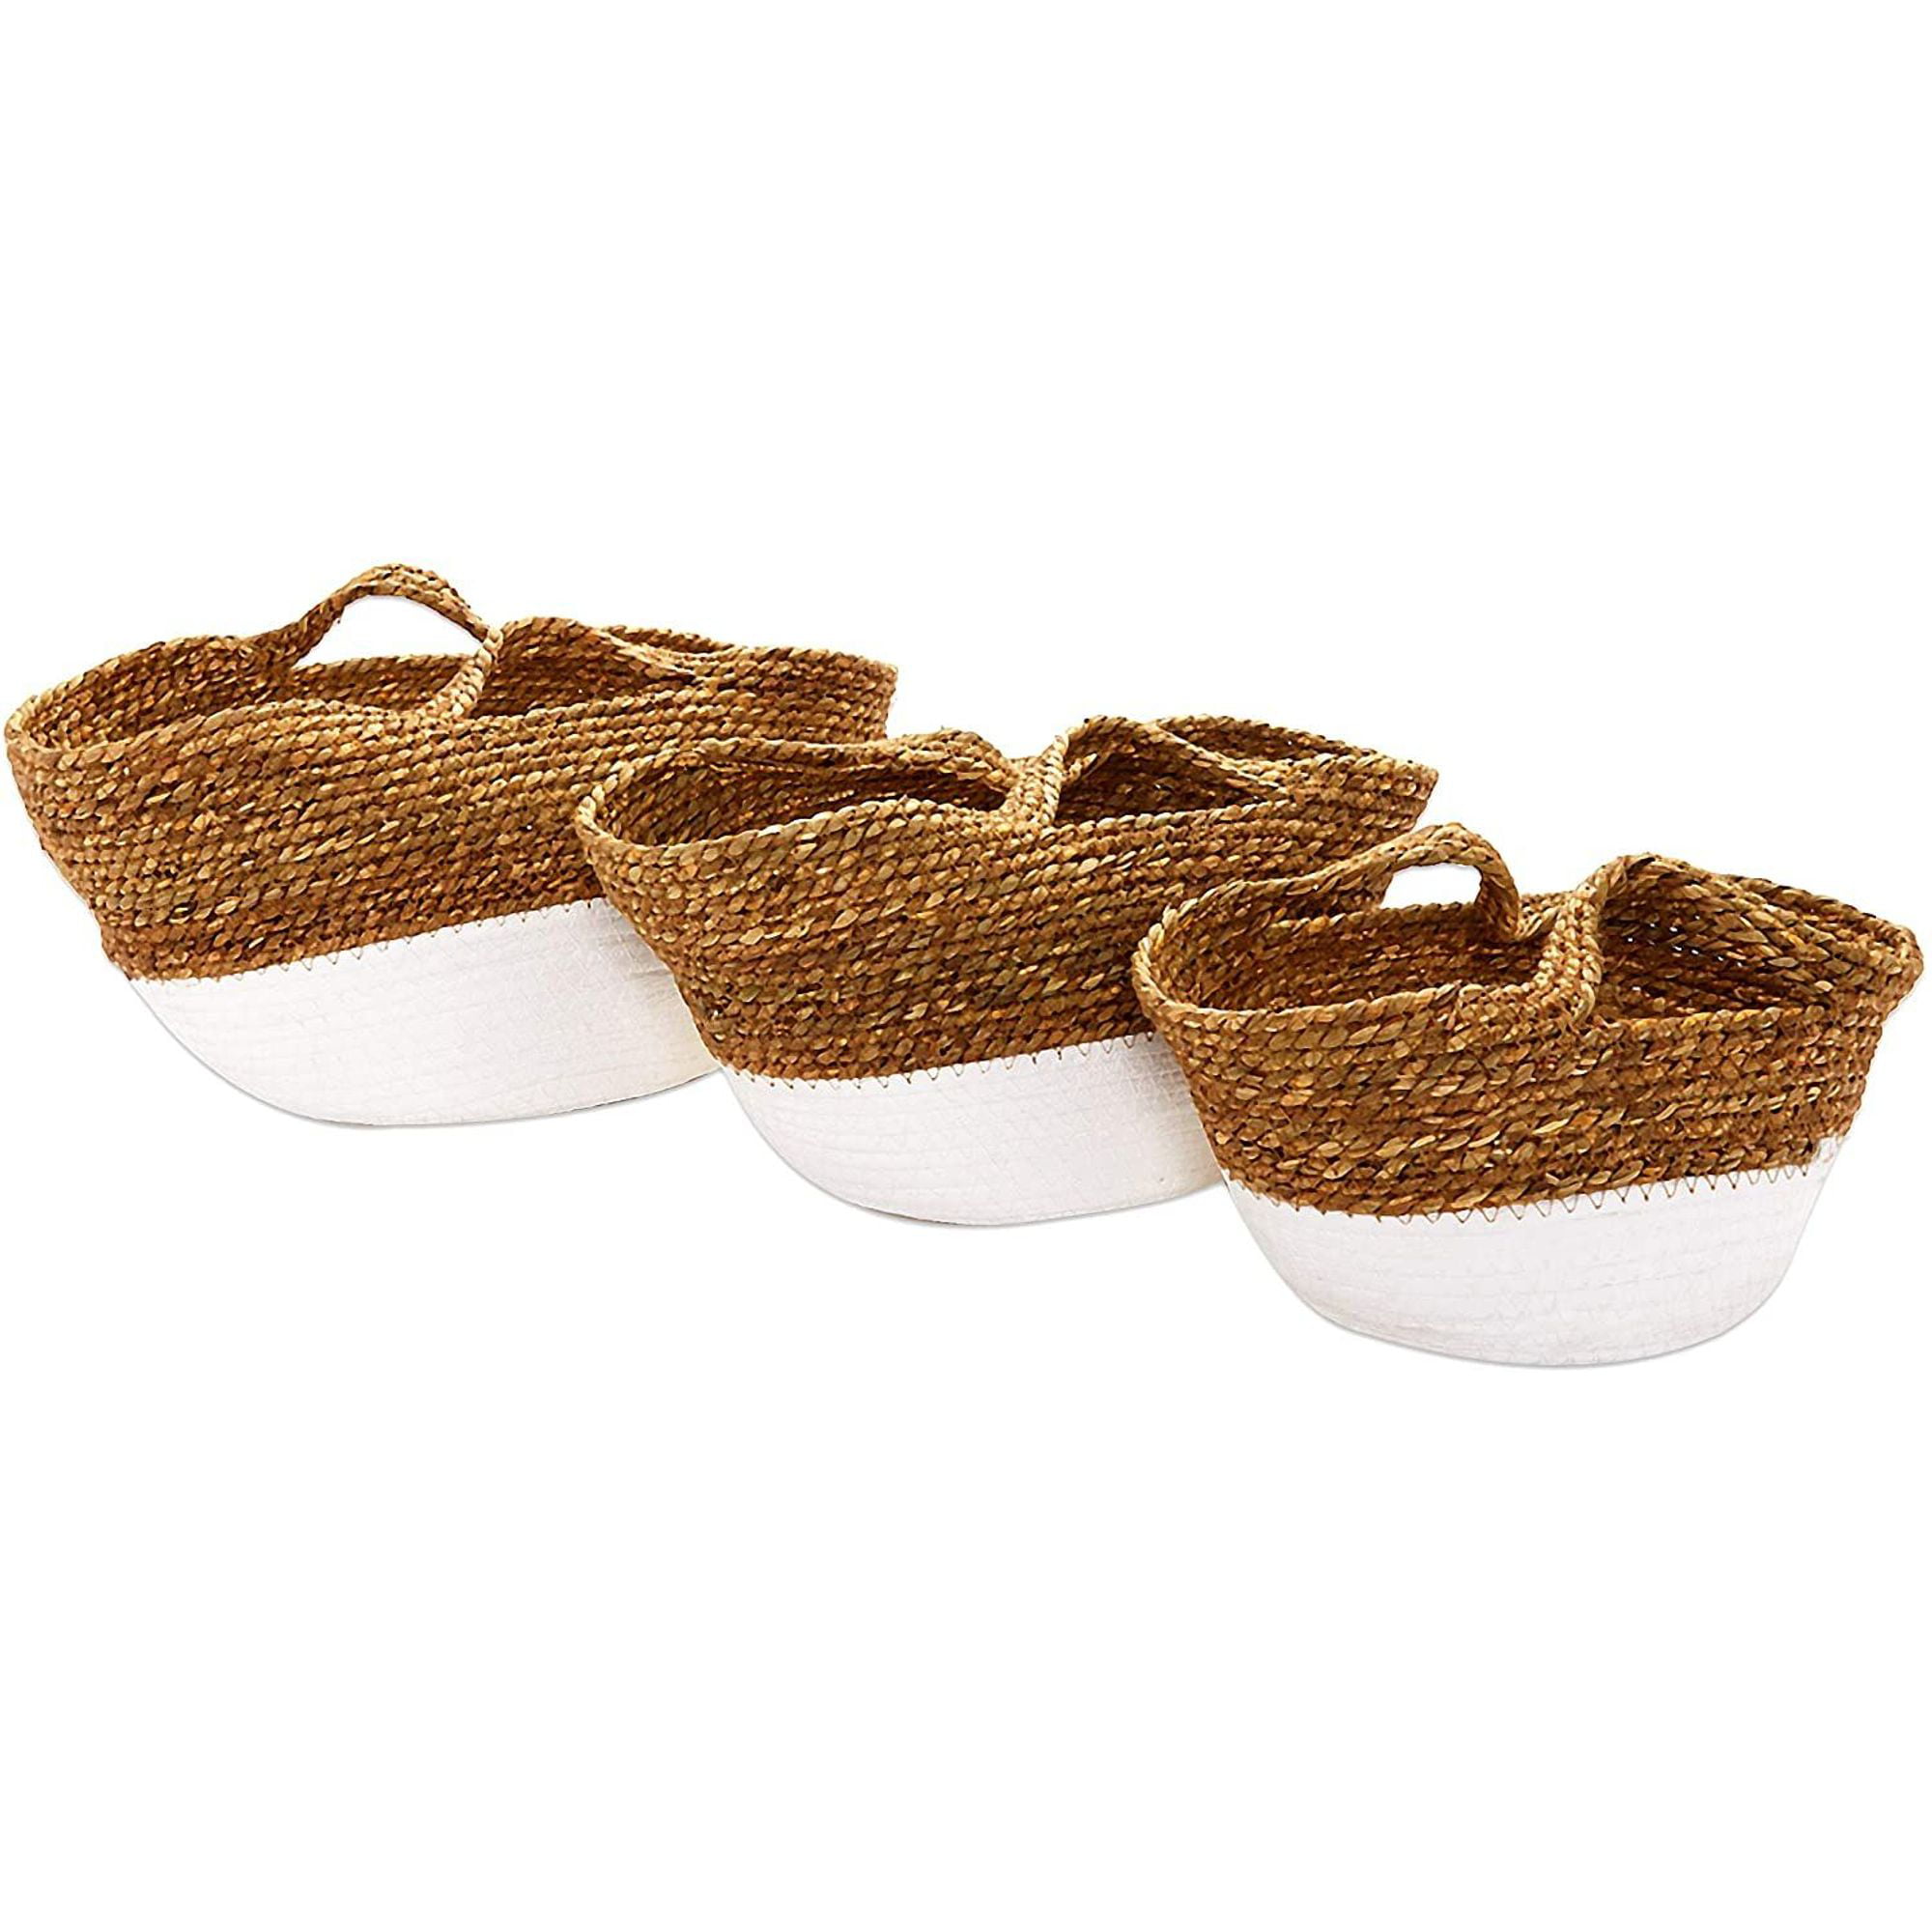 Set of 3 Round Boho Woven Rope Storage Baskets Bins with Handles, White/Yellow, 3 Sizes